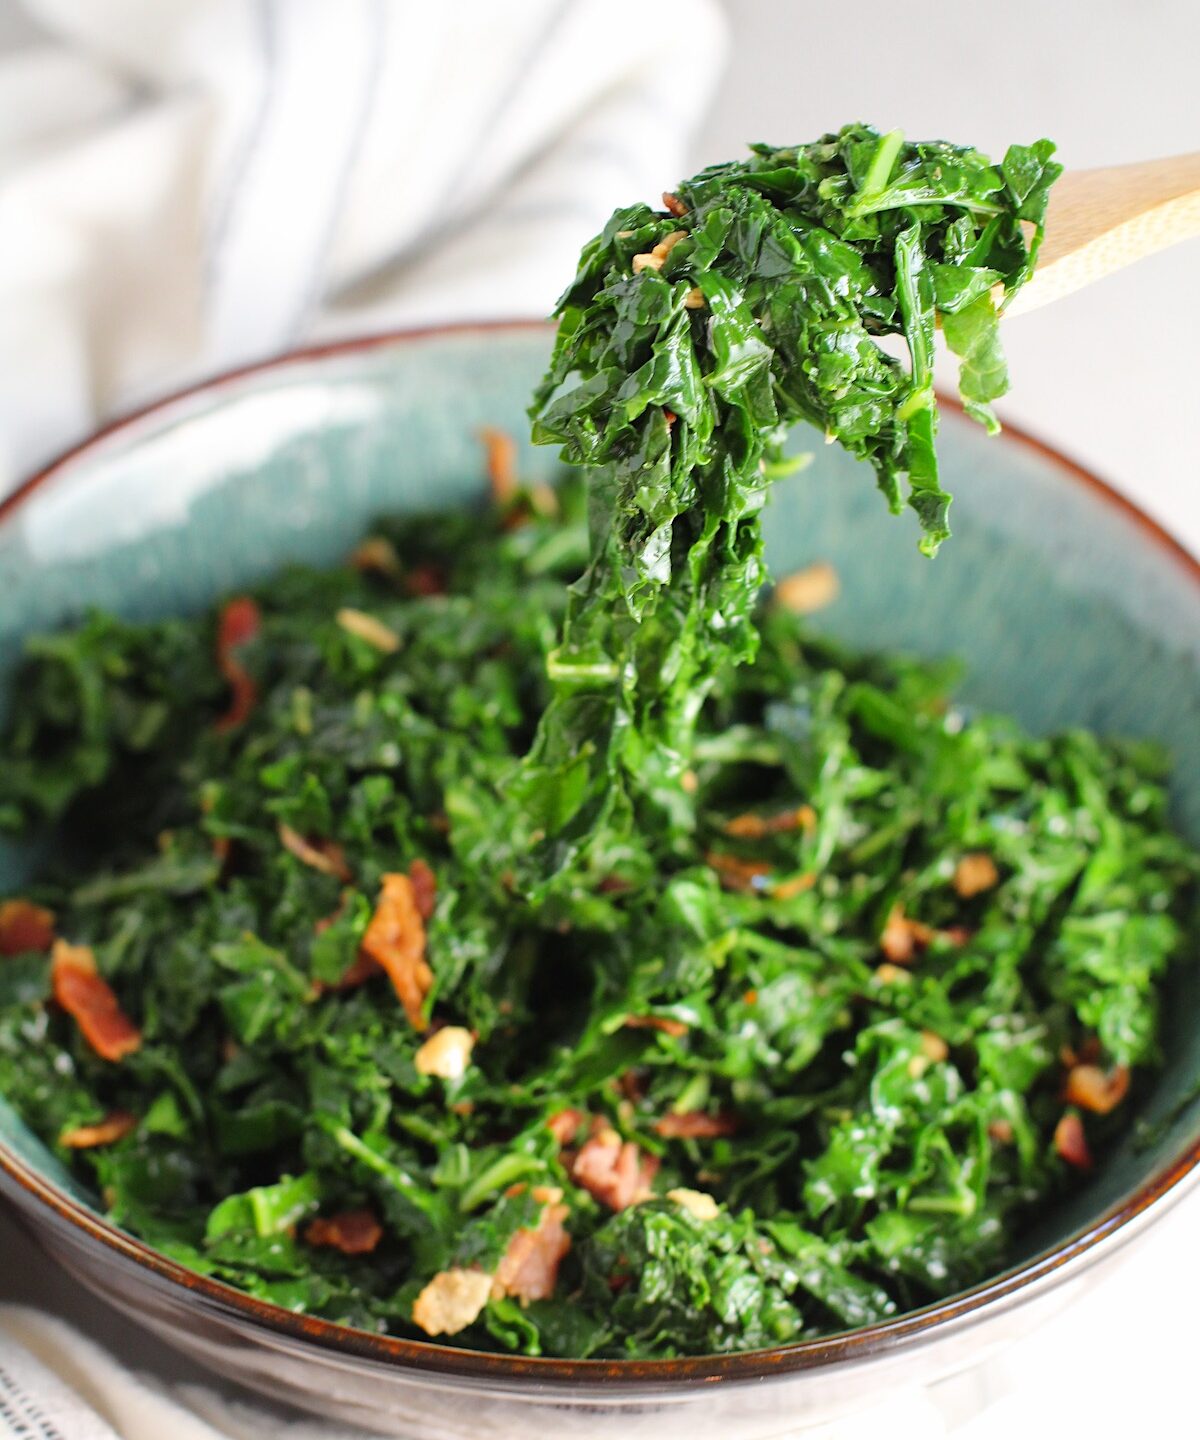 Spoon scooping Brazilian sauteed Kale with Bacon and Garlic in a bowl on counter with white and blue towel. It's known as Couve Mineira in Portuguese, and is an easy and delicious side for any dinner!